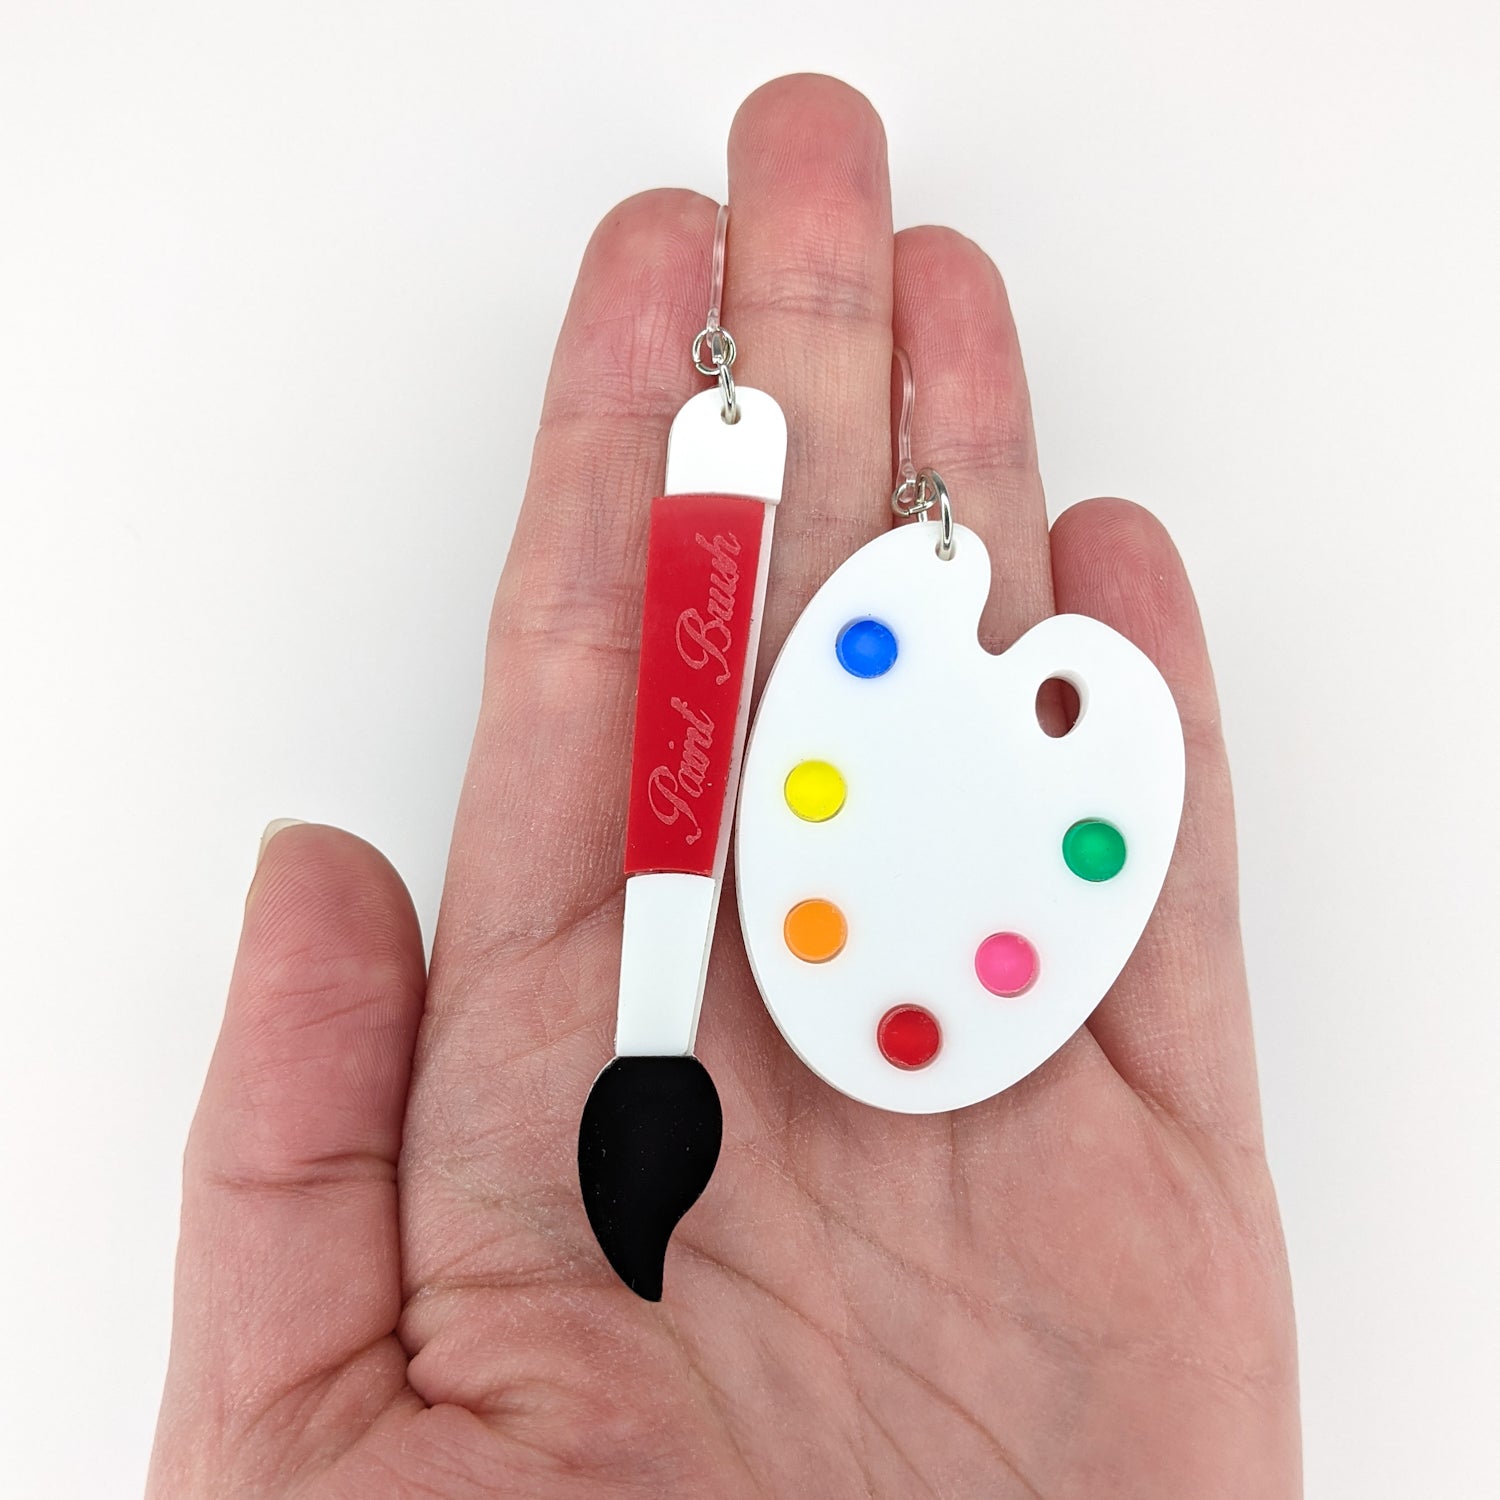 Exaggerated Paint Brush & Palette Earrings (Dangles) - size comparison hand